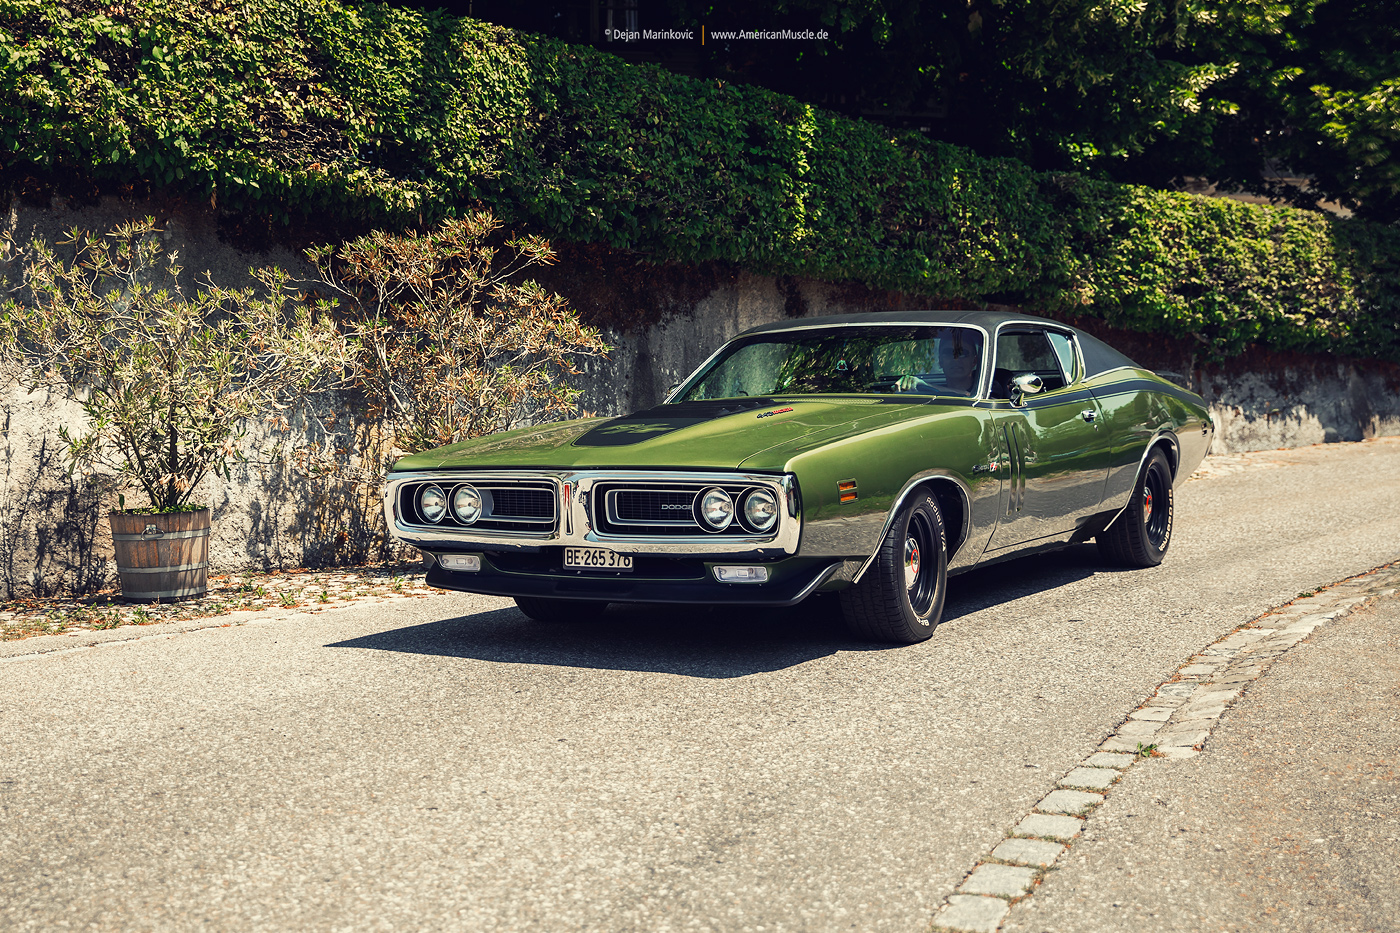 1971 Dodge Charger R/T 440 Magnum by AmericanMuscle on DeviantArt